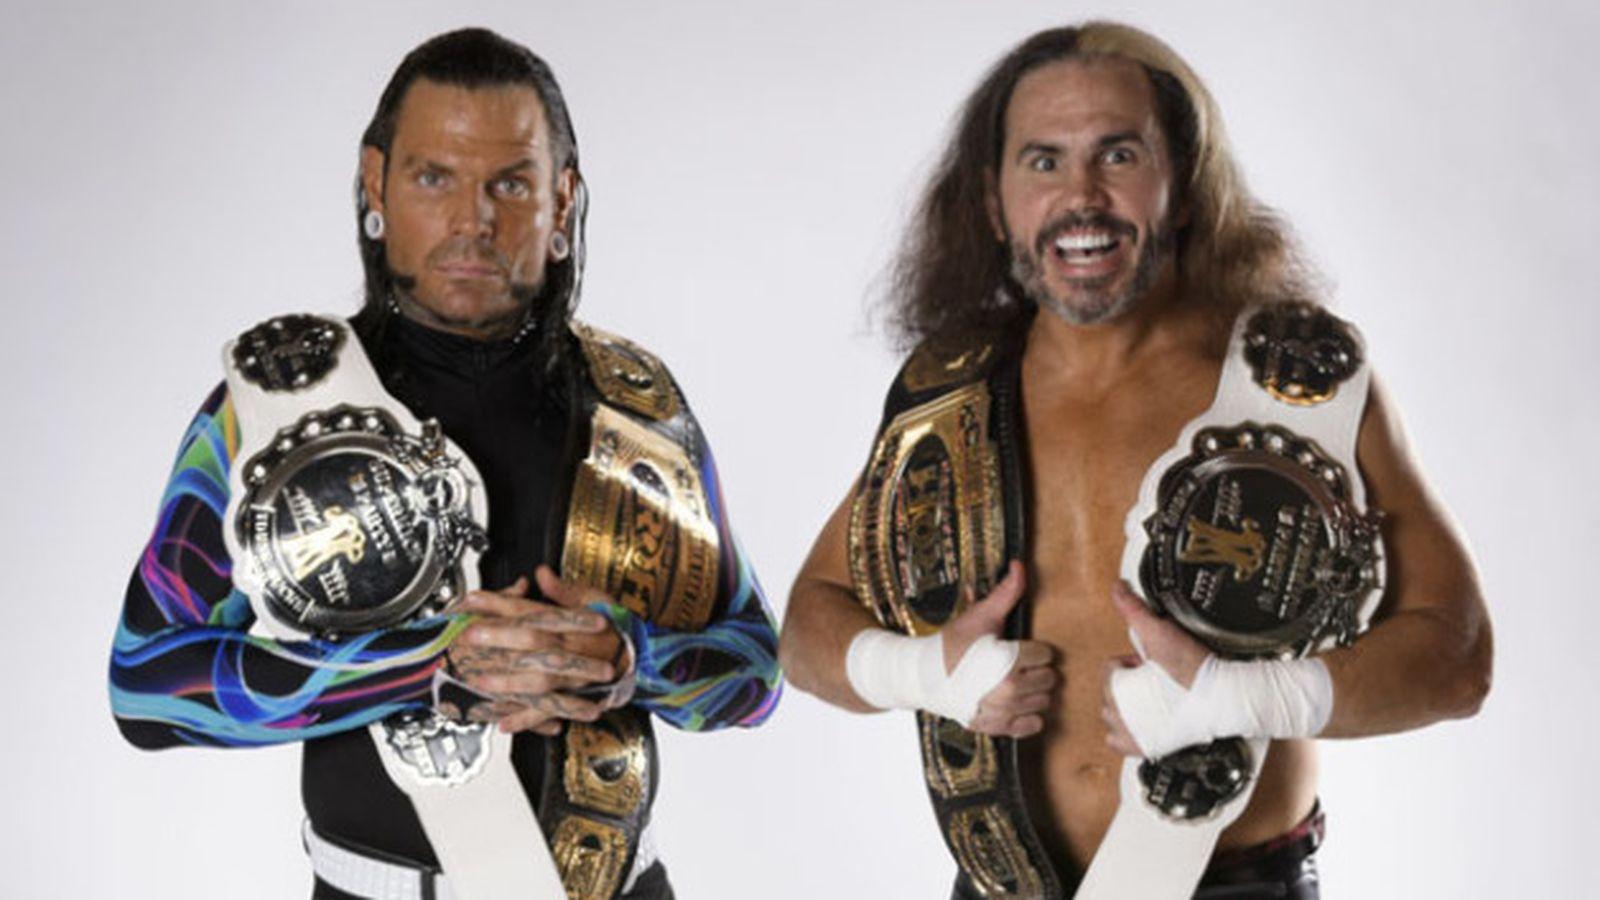 Jeff Hardy says there is 'no truth' to reports he and Matt have